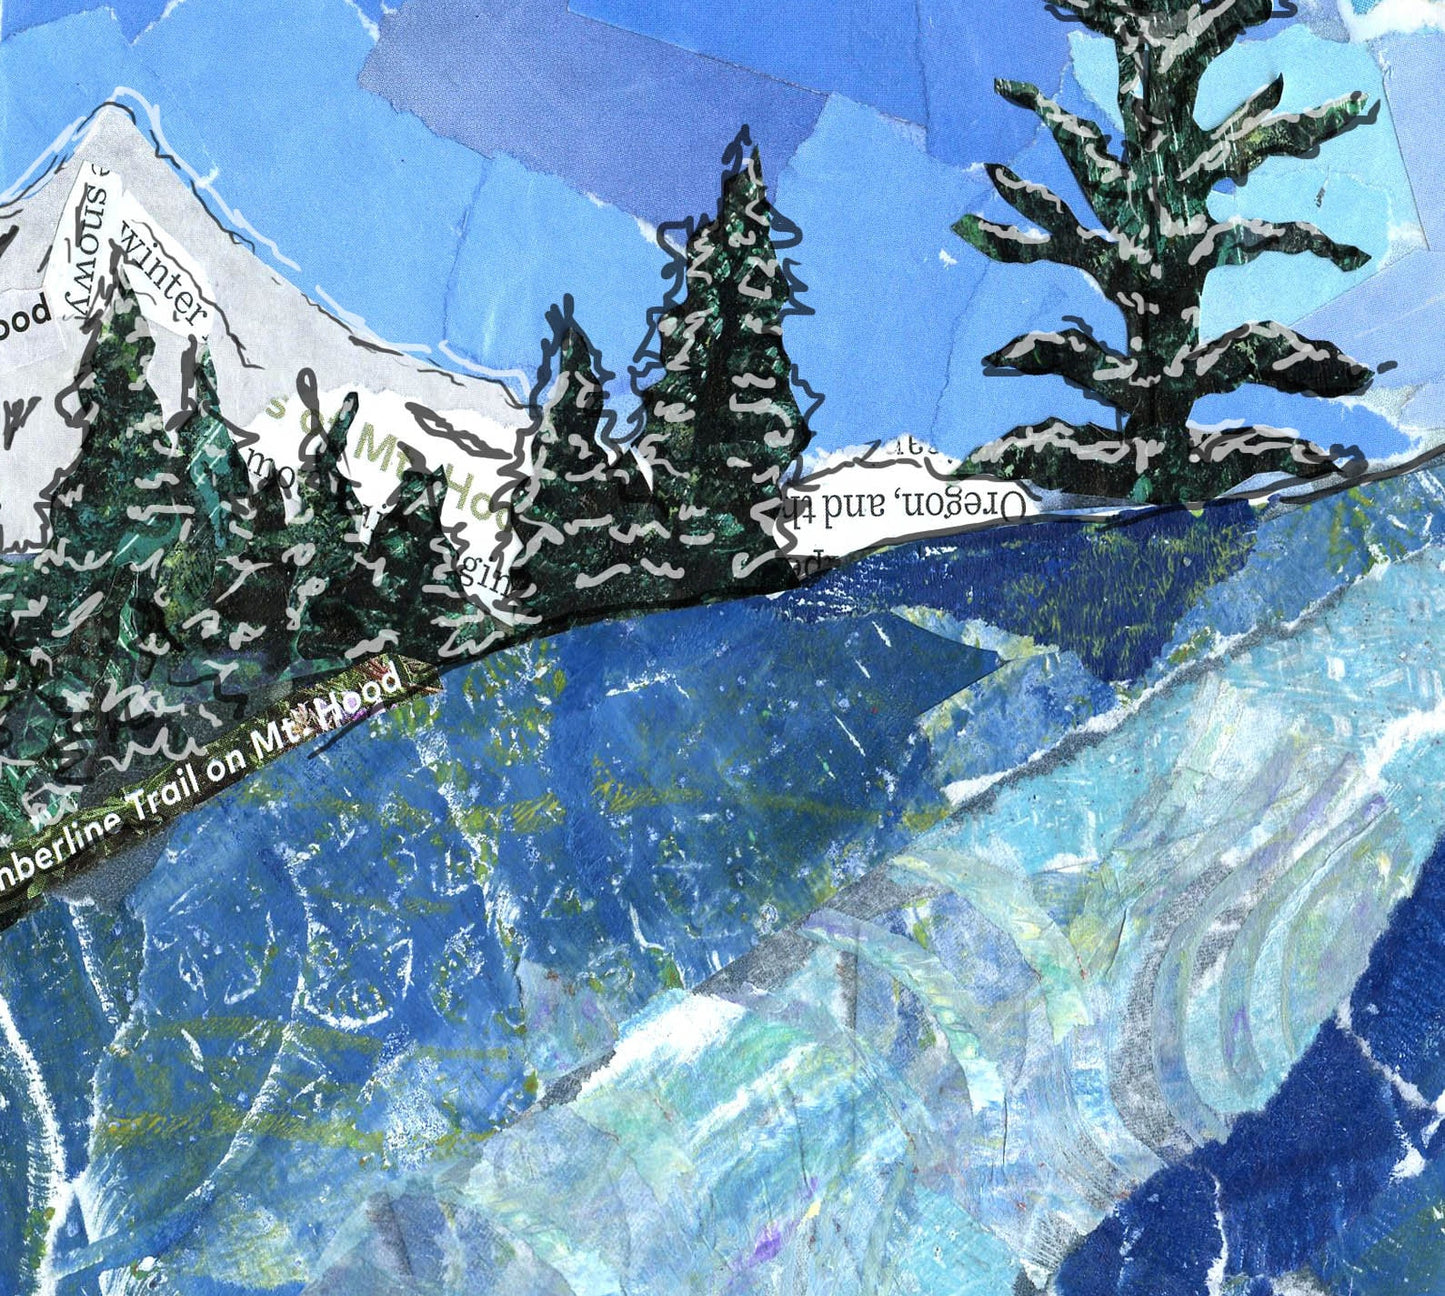 8x10 Art print of a Paper Collage of a Person Snow Shoeing Near Mt. Hood-Oregon - Winter Wall Art